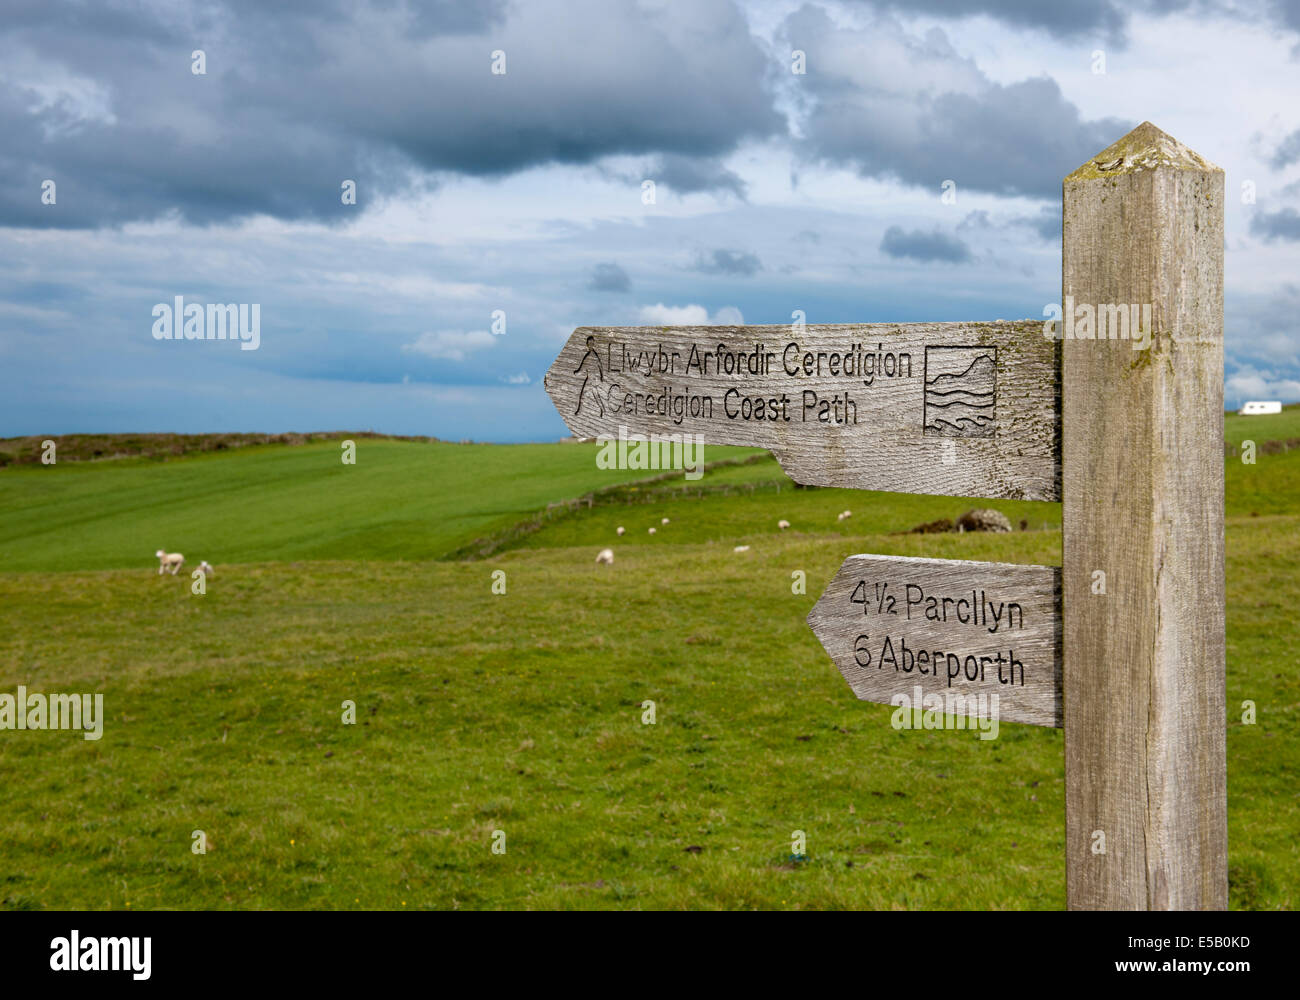 Finger-post sign for the Ceredigion Coast Path at Mwnt, Ceredigion, Wales, UK. Stock Photo